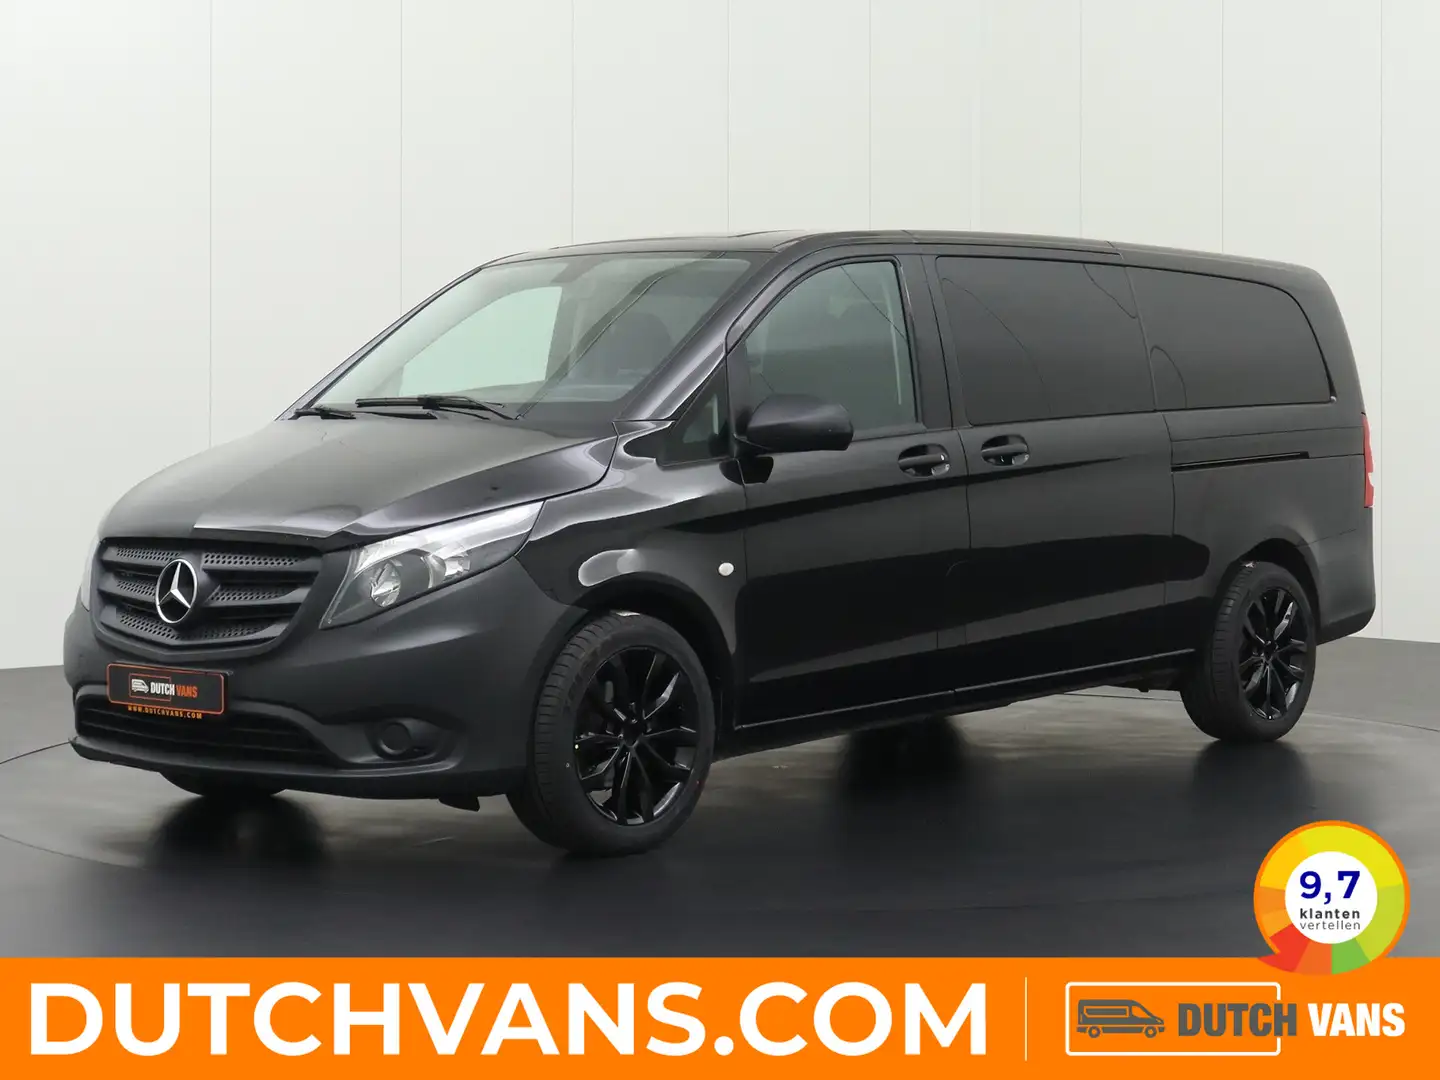 Mercedes-Benz Vito 116CDI XLang 7G-Tronic Automaat Dubbele Cabine Exc Siyah - 1